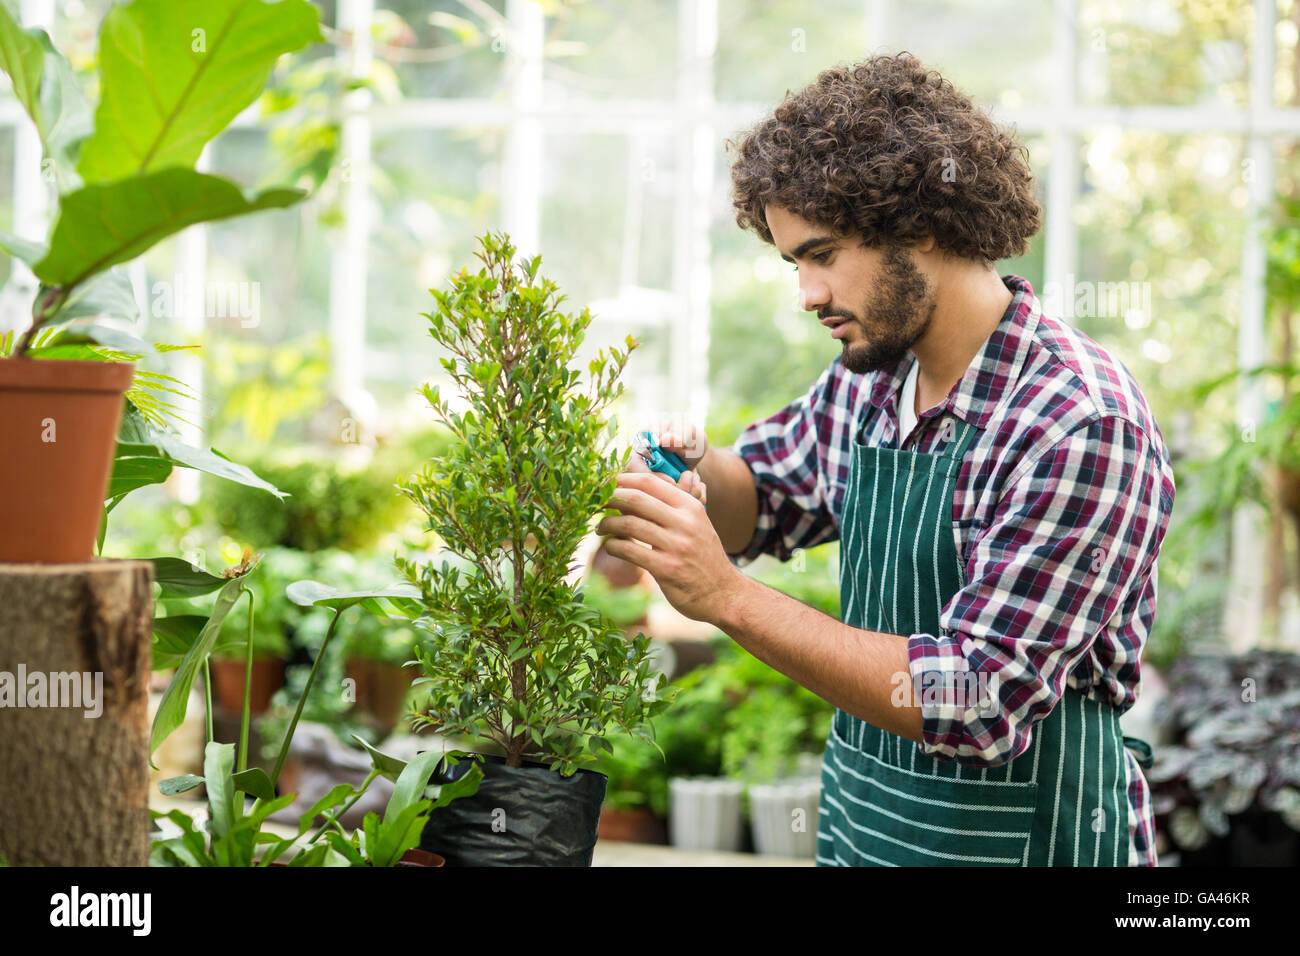 Male gardener pruning potted plants Stock Photo